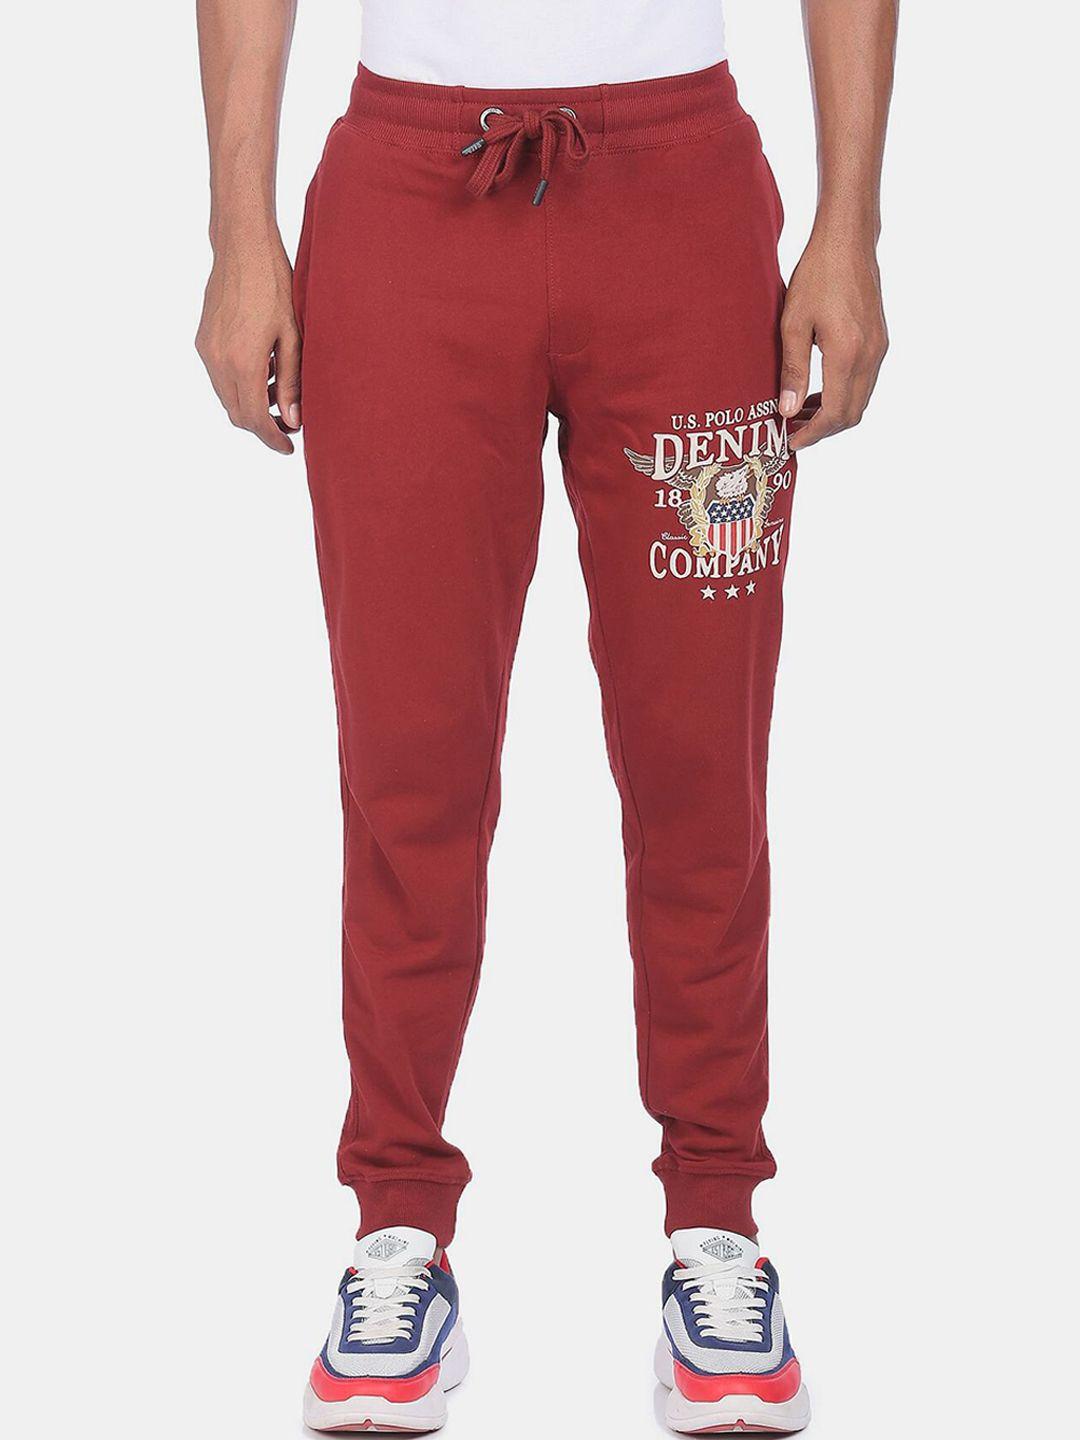 u.s. polo assn. denim co. men maroon solid straight fit joggers